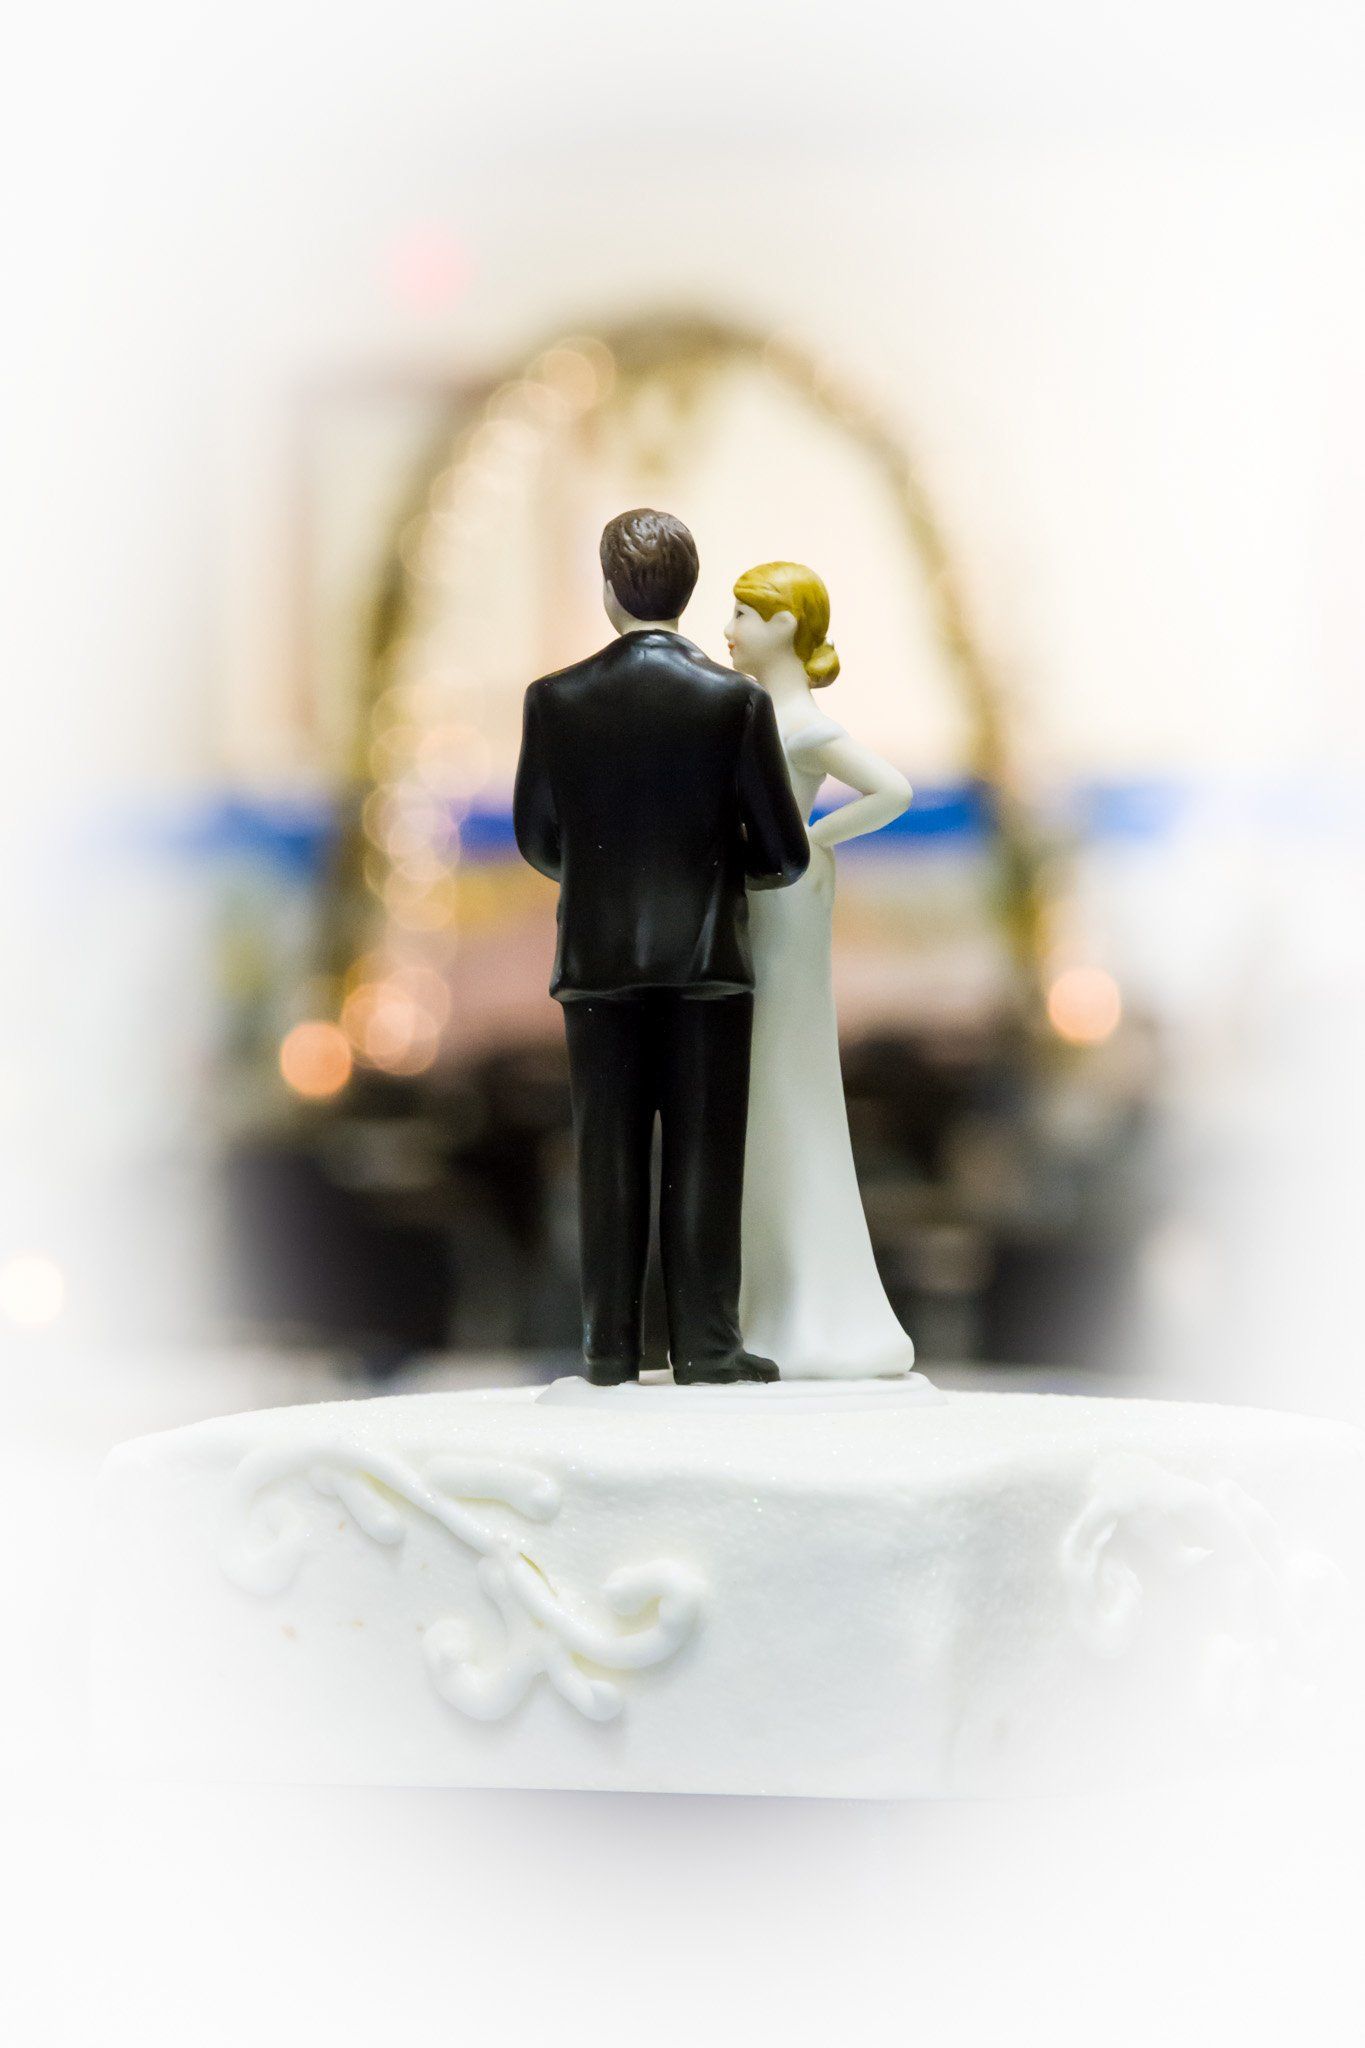 An artistic image of a wedding cake top with bride and groom figures